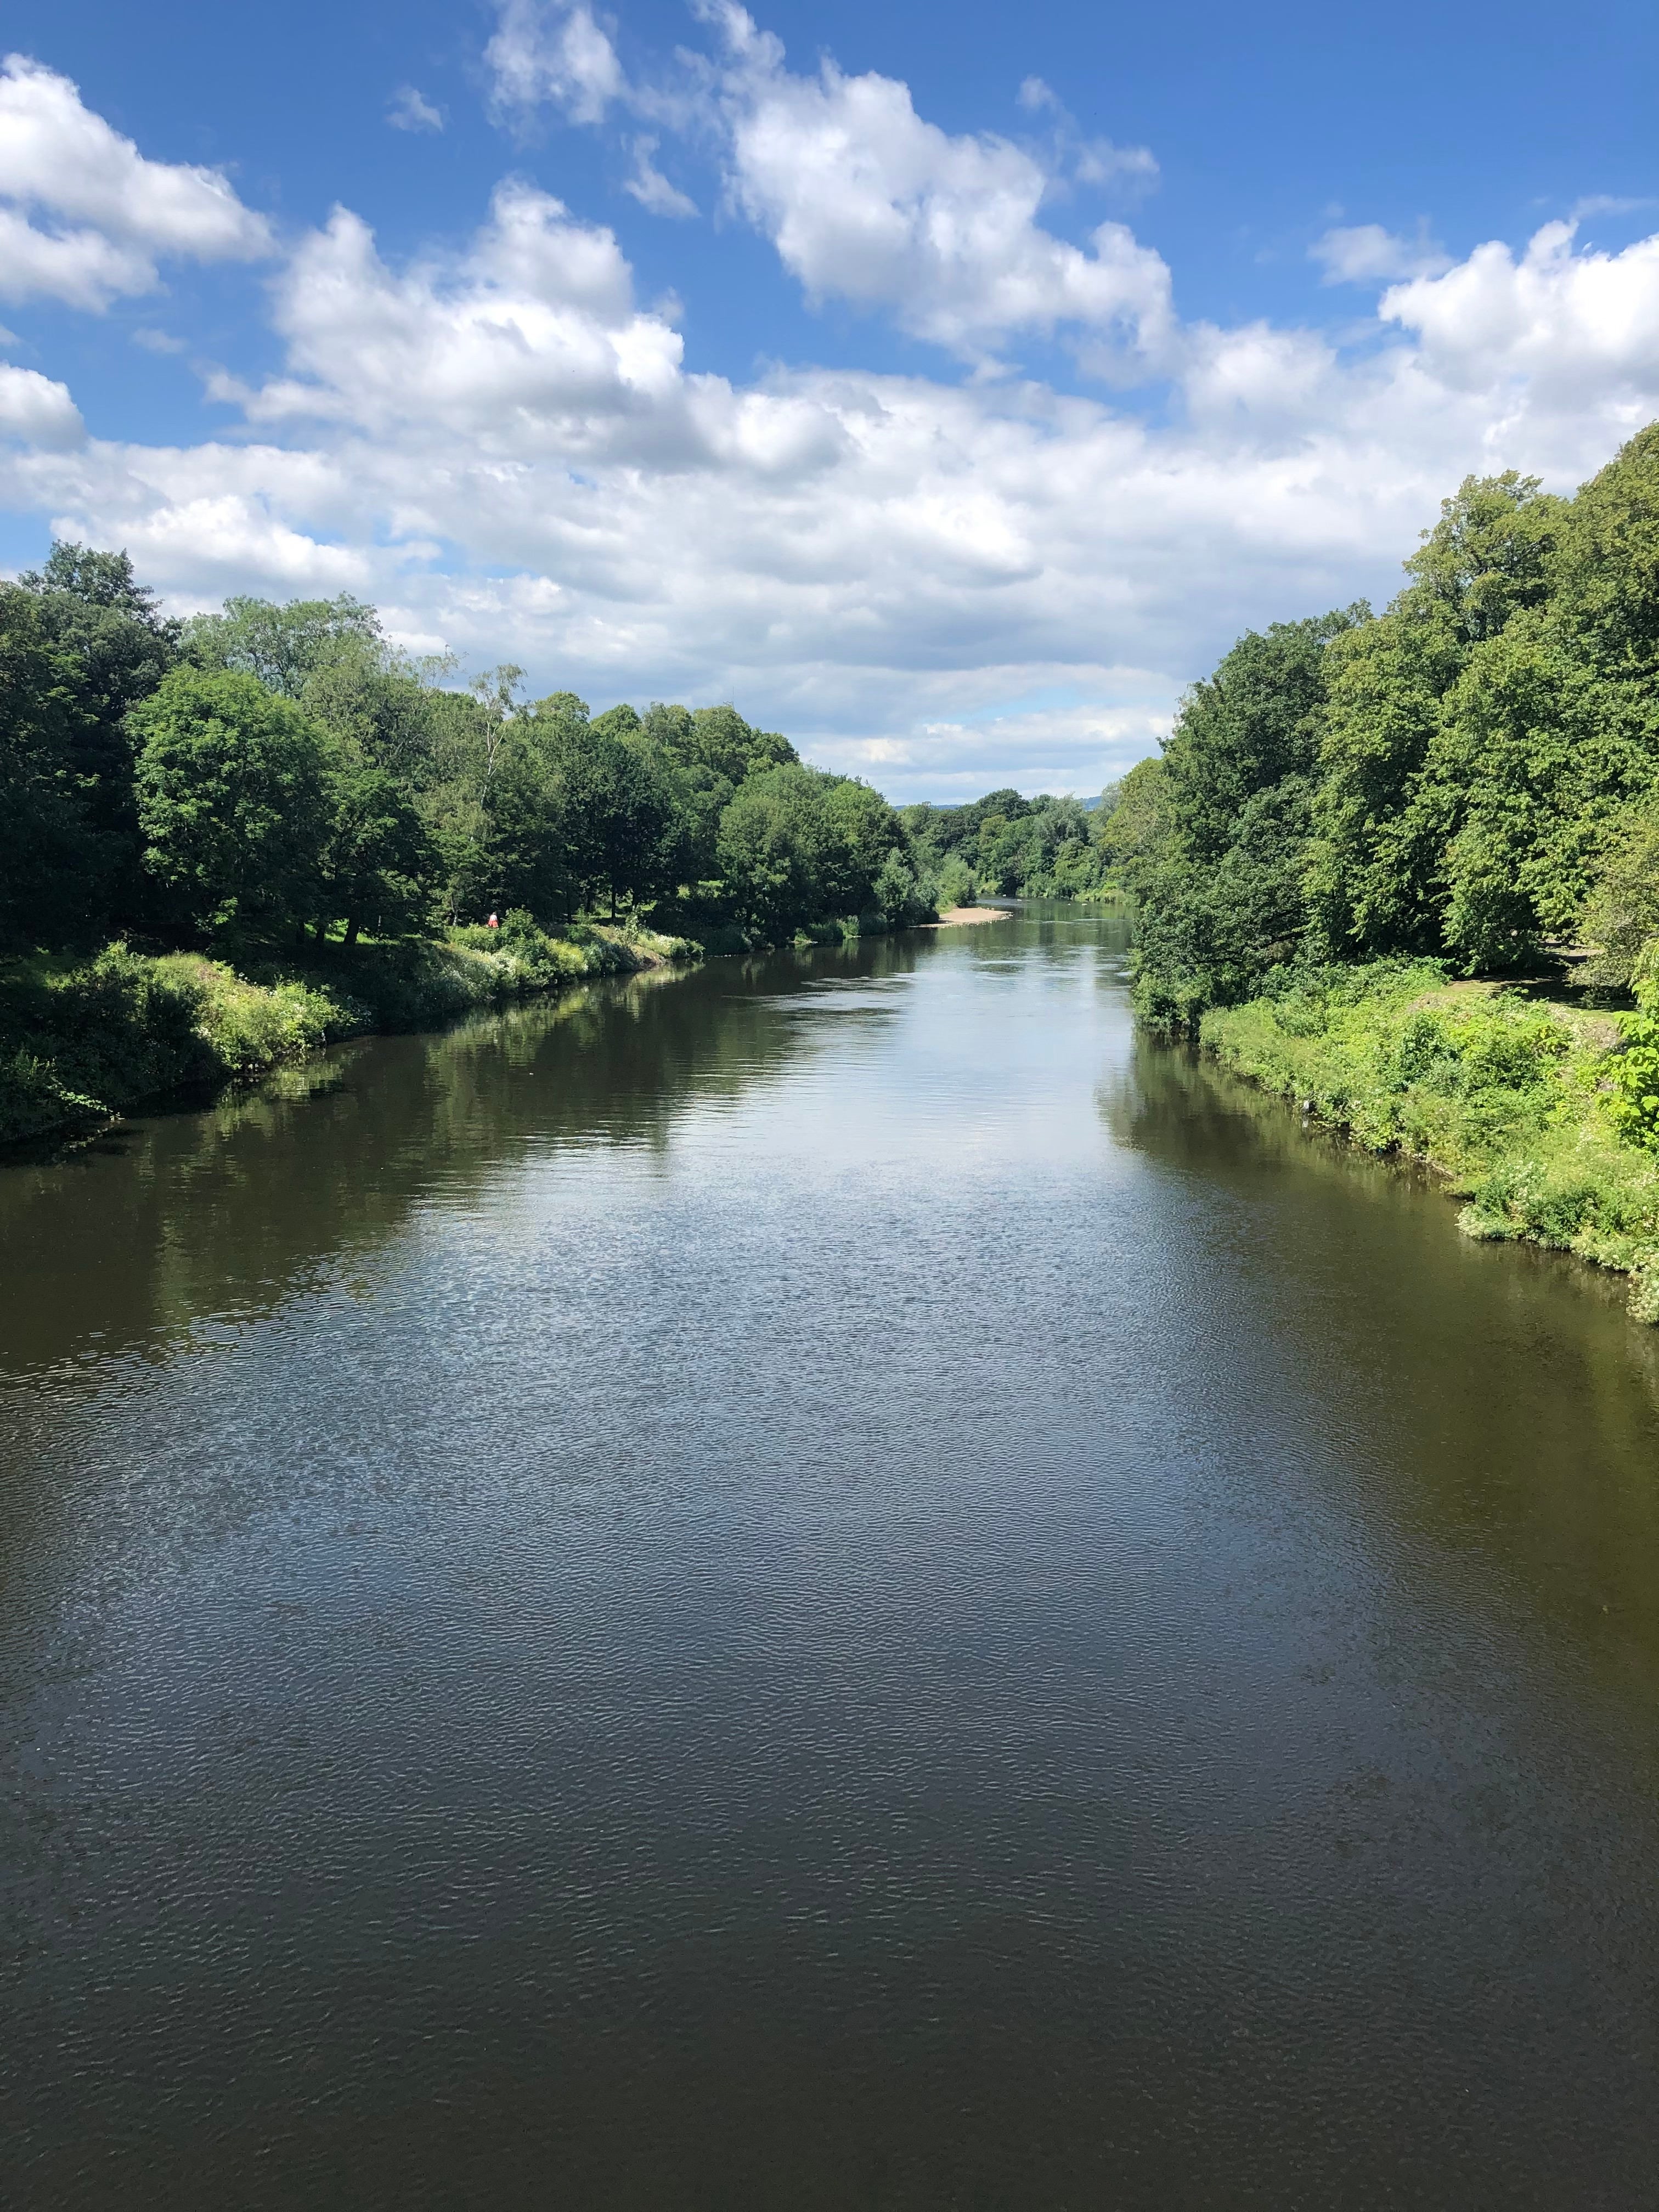 This is the River Taff. The water is wide and deep blue, with trees lining either side. The sky is blue and mostly clear of clouds.